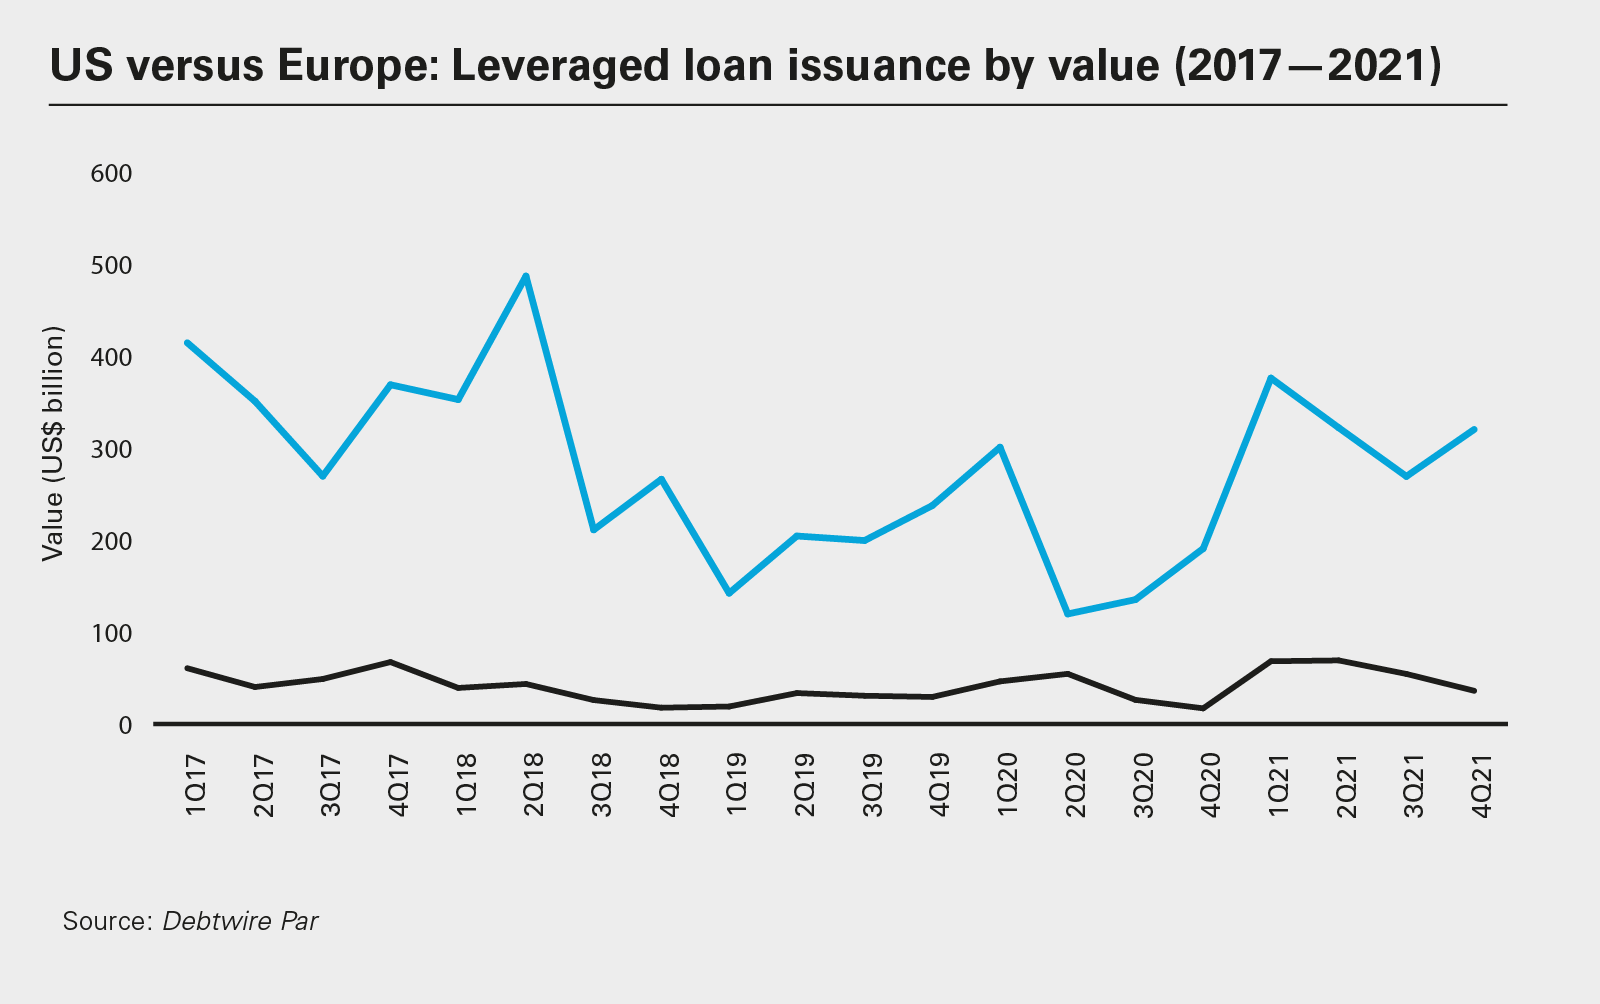 US versus Europe: Leveraged loan issuance by value (2017—2021)